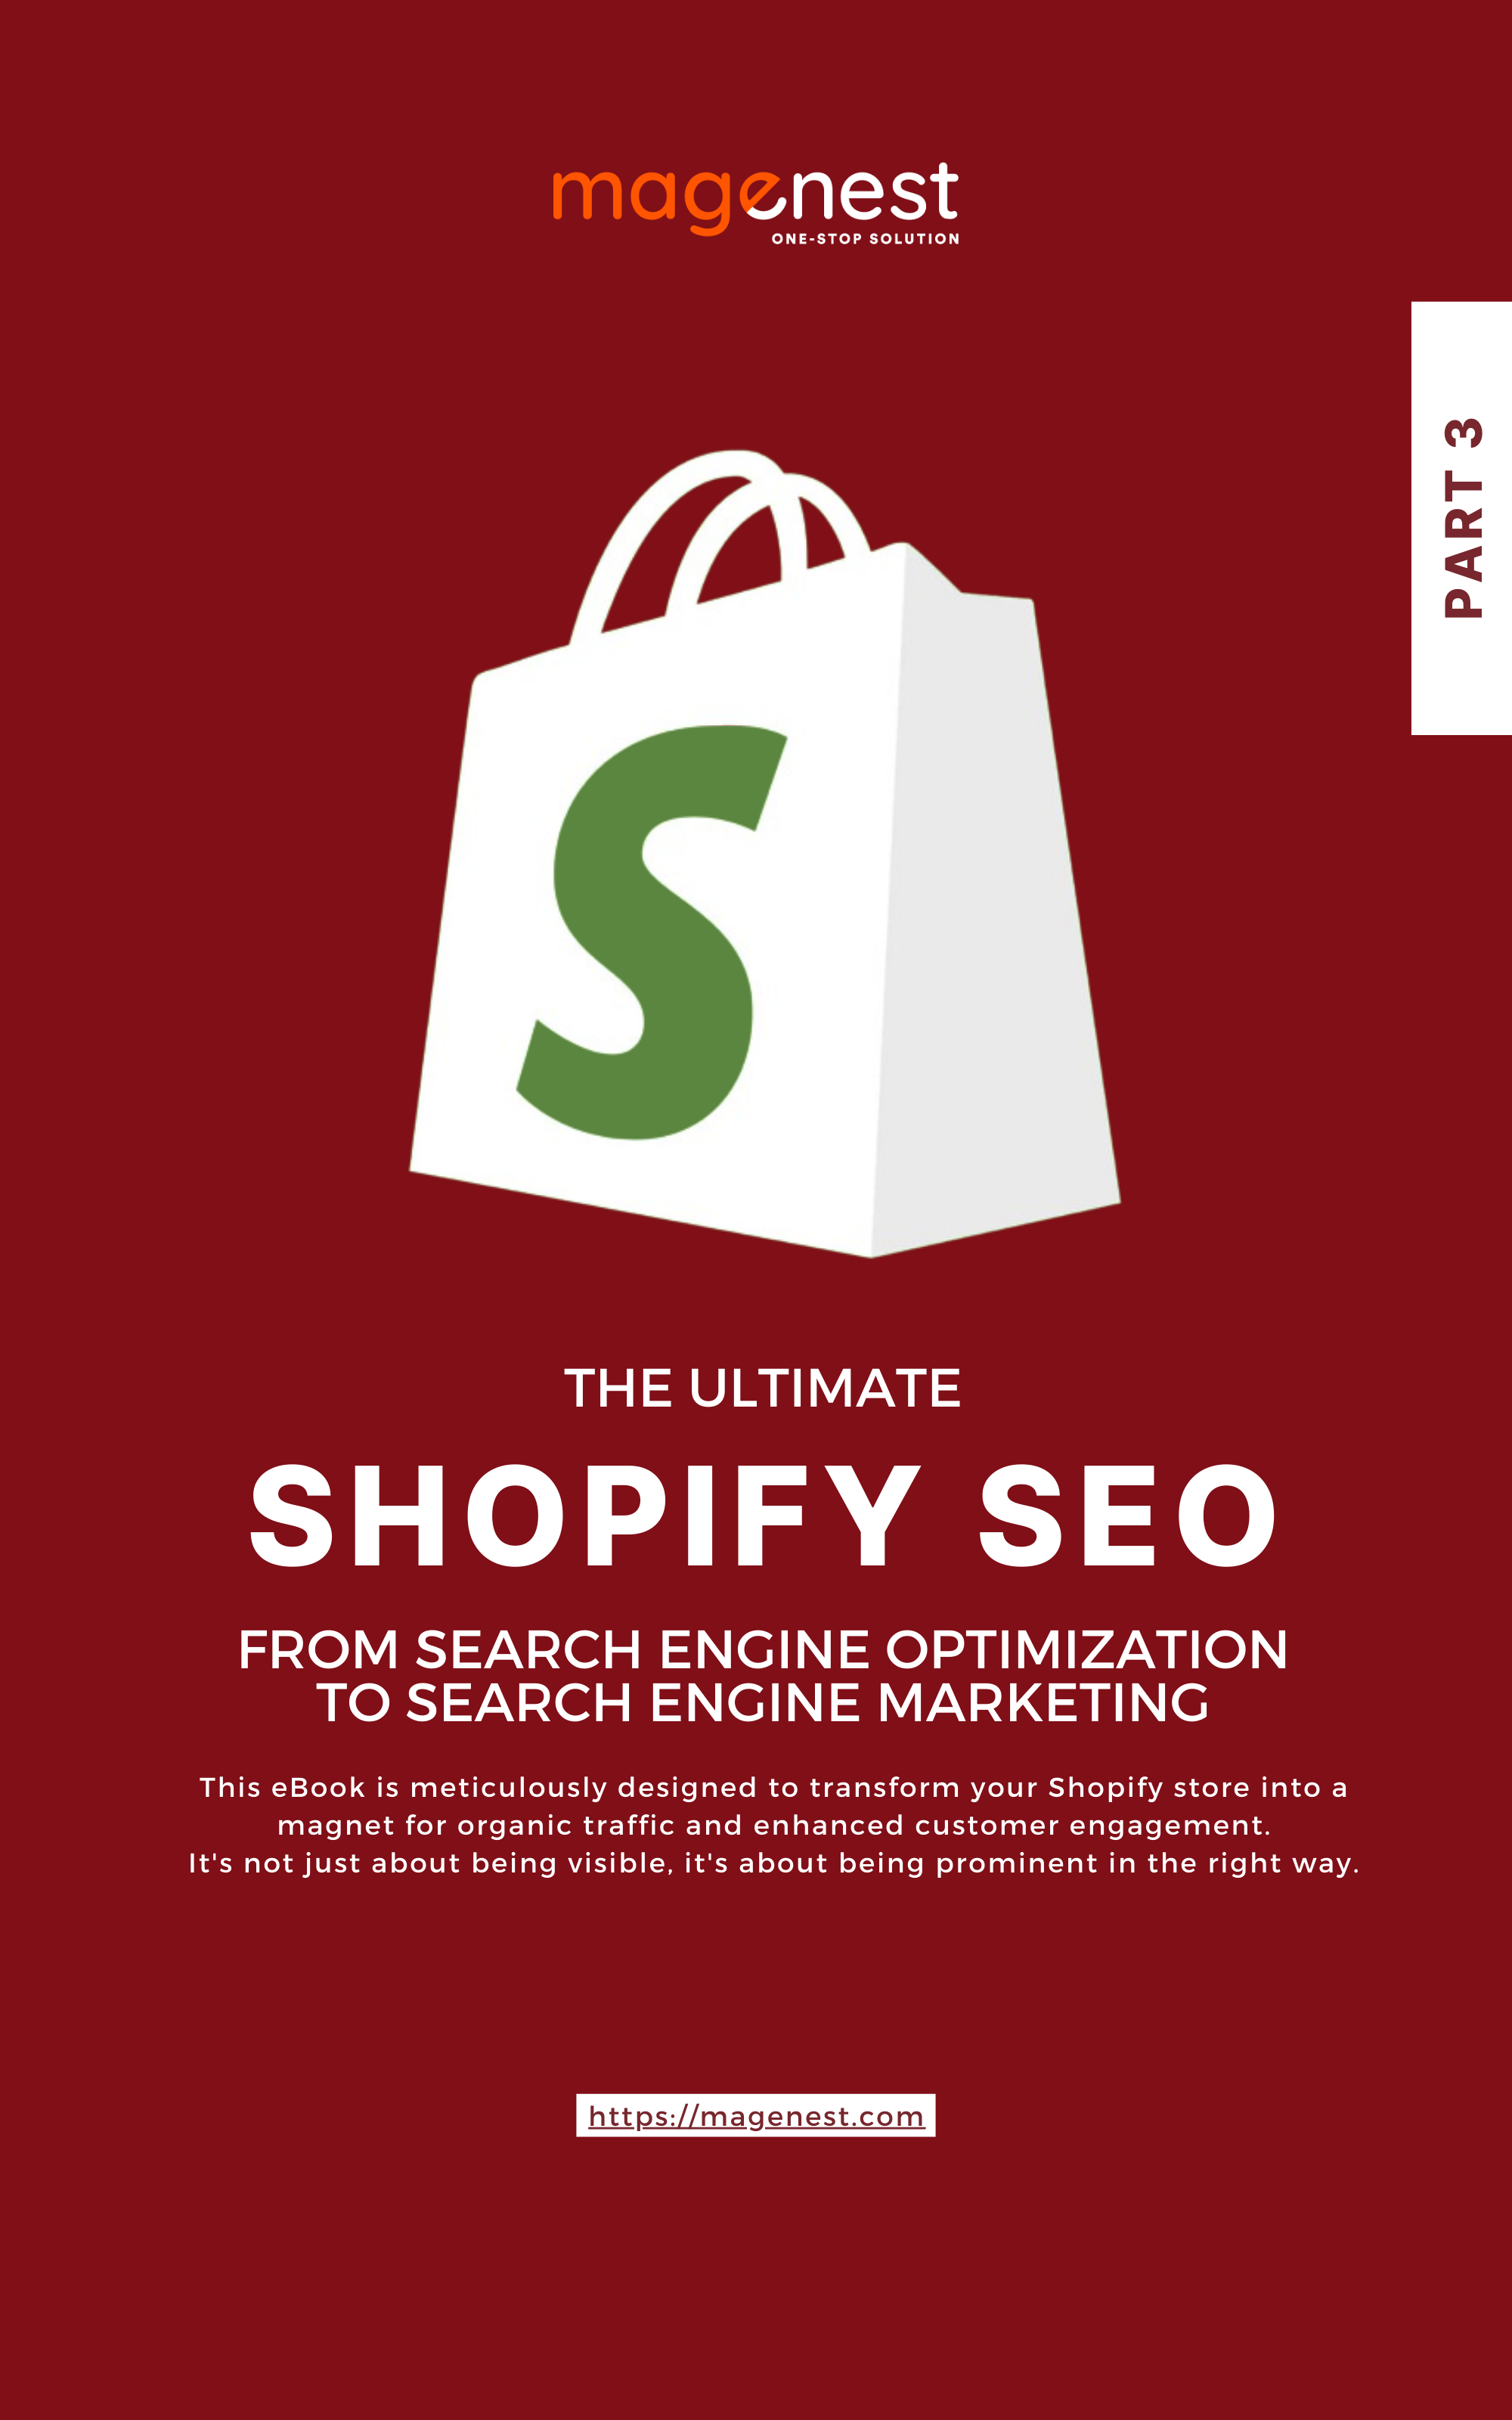 eBook SHOPIFY SEO GUIDE PART 3: The Ultimate Tips from SEO to SEM0